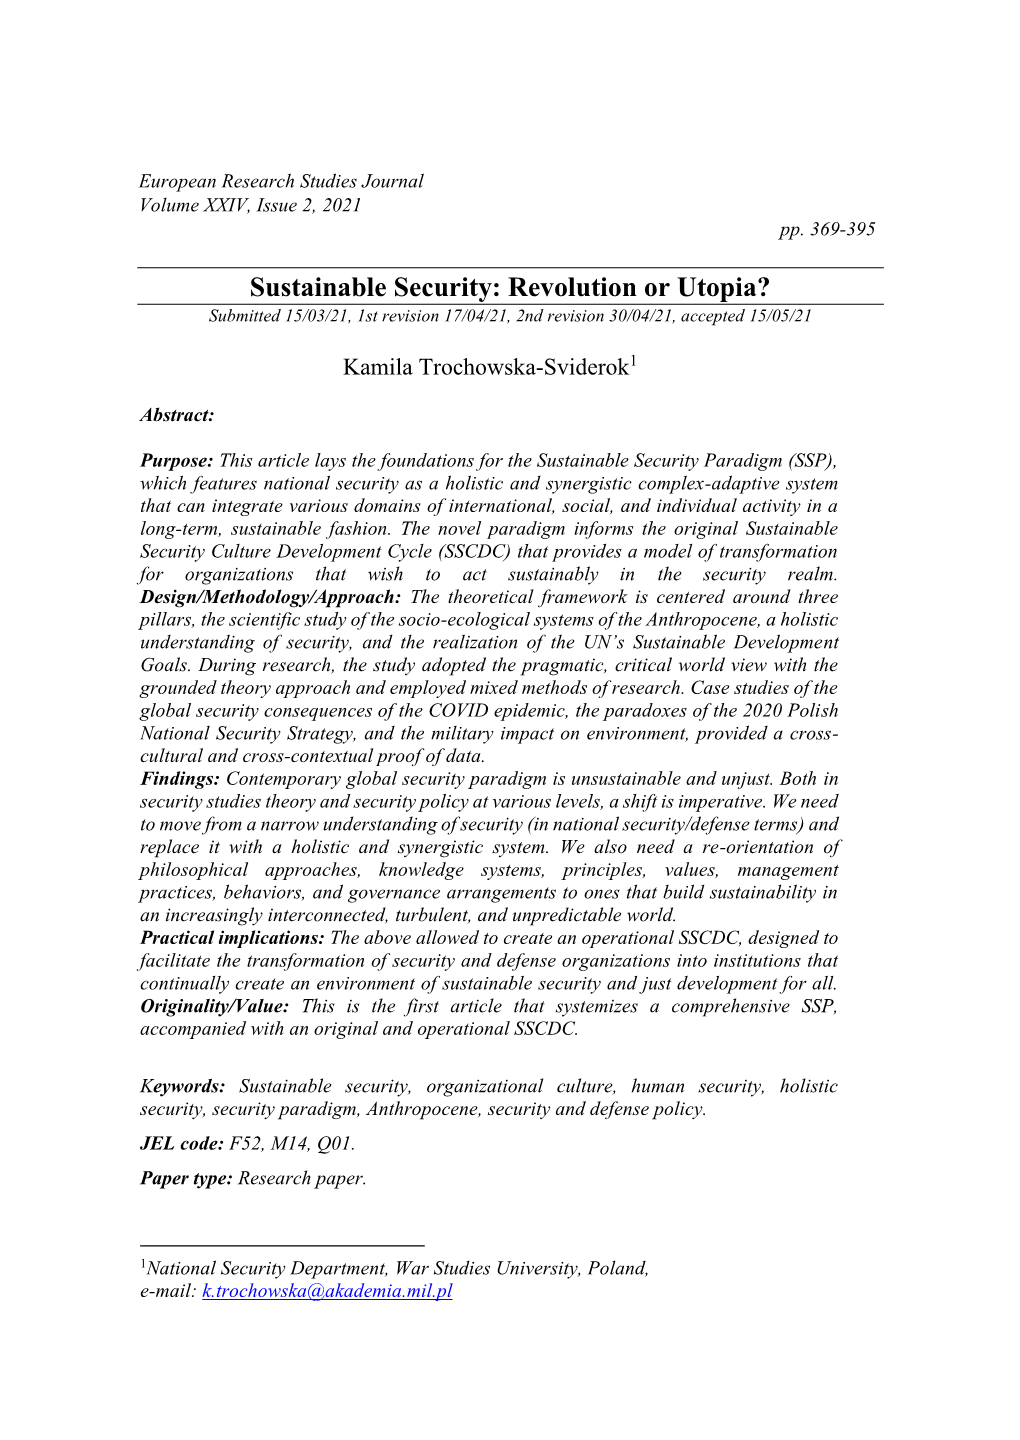 Sustainable Security: Revolution Or Utopia? Submitted 15/03/21, 1St Revision 17/04/21, 2Nd Revision 30/04/21, Accepted 15/05/21